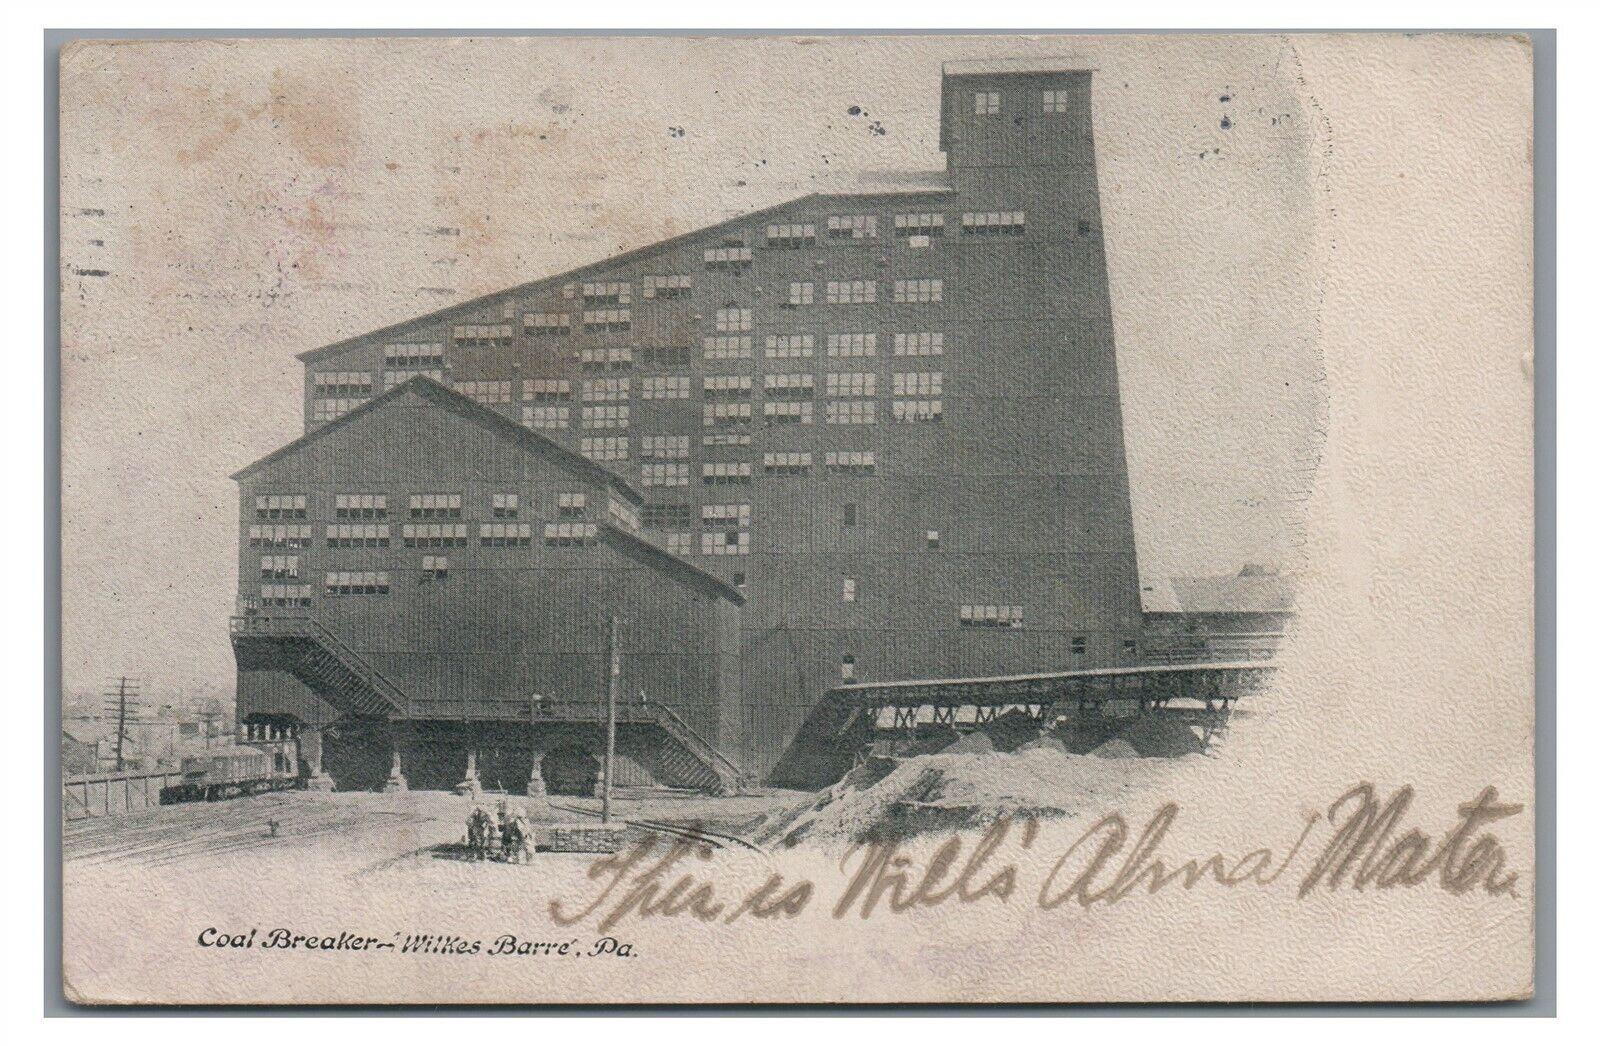 Coal Breaker Anthracite Mining WILKES BARRE PA Luzerne County Postcard